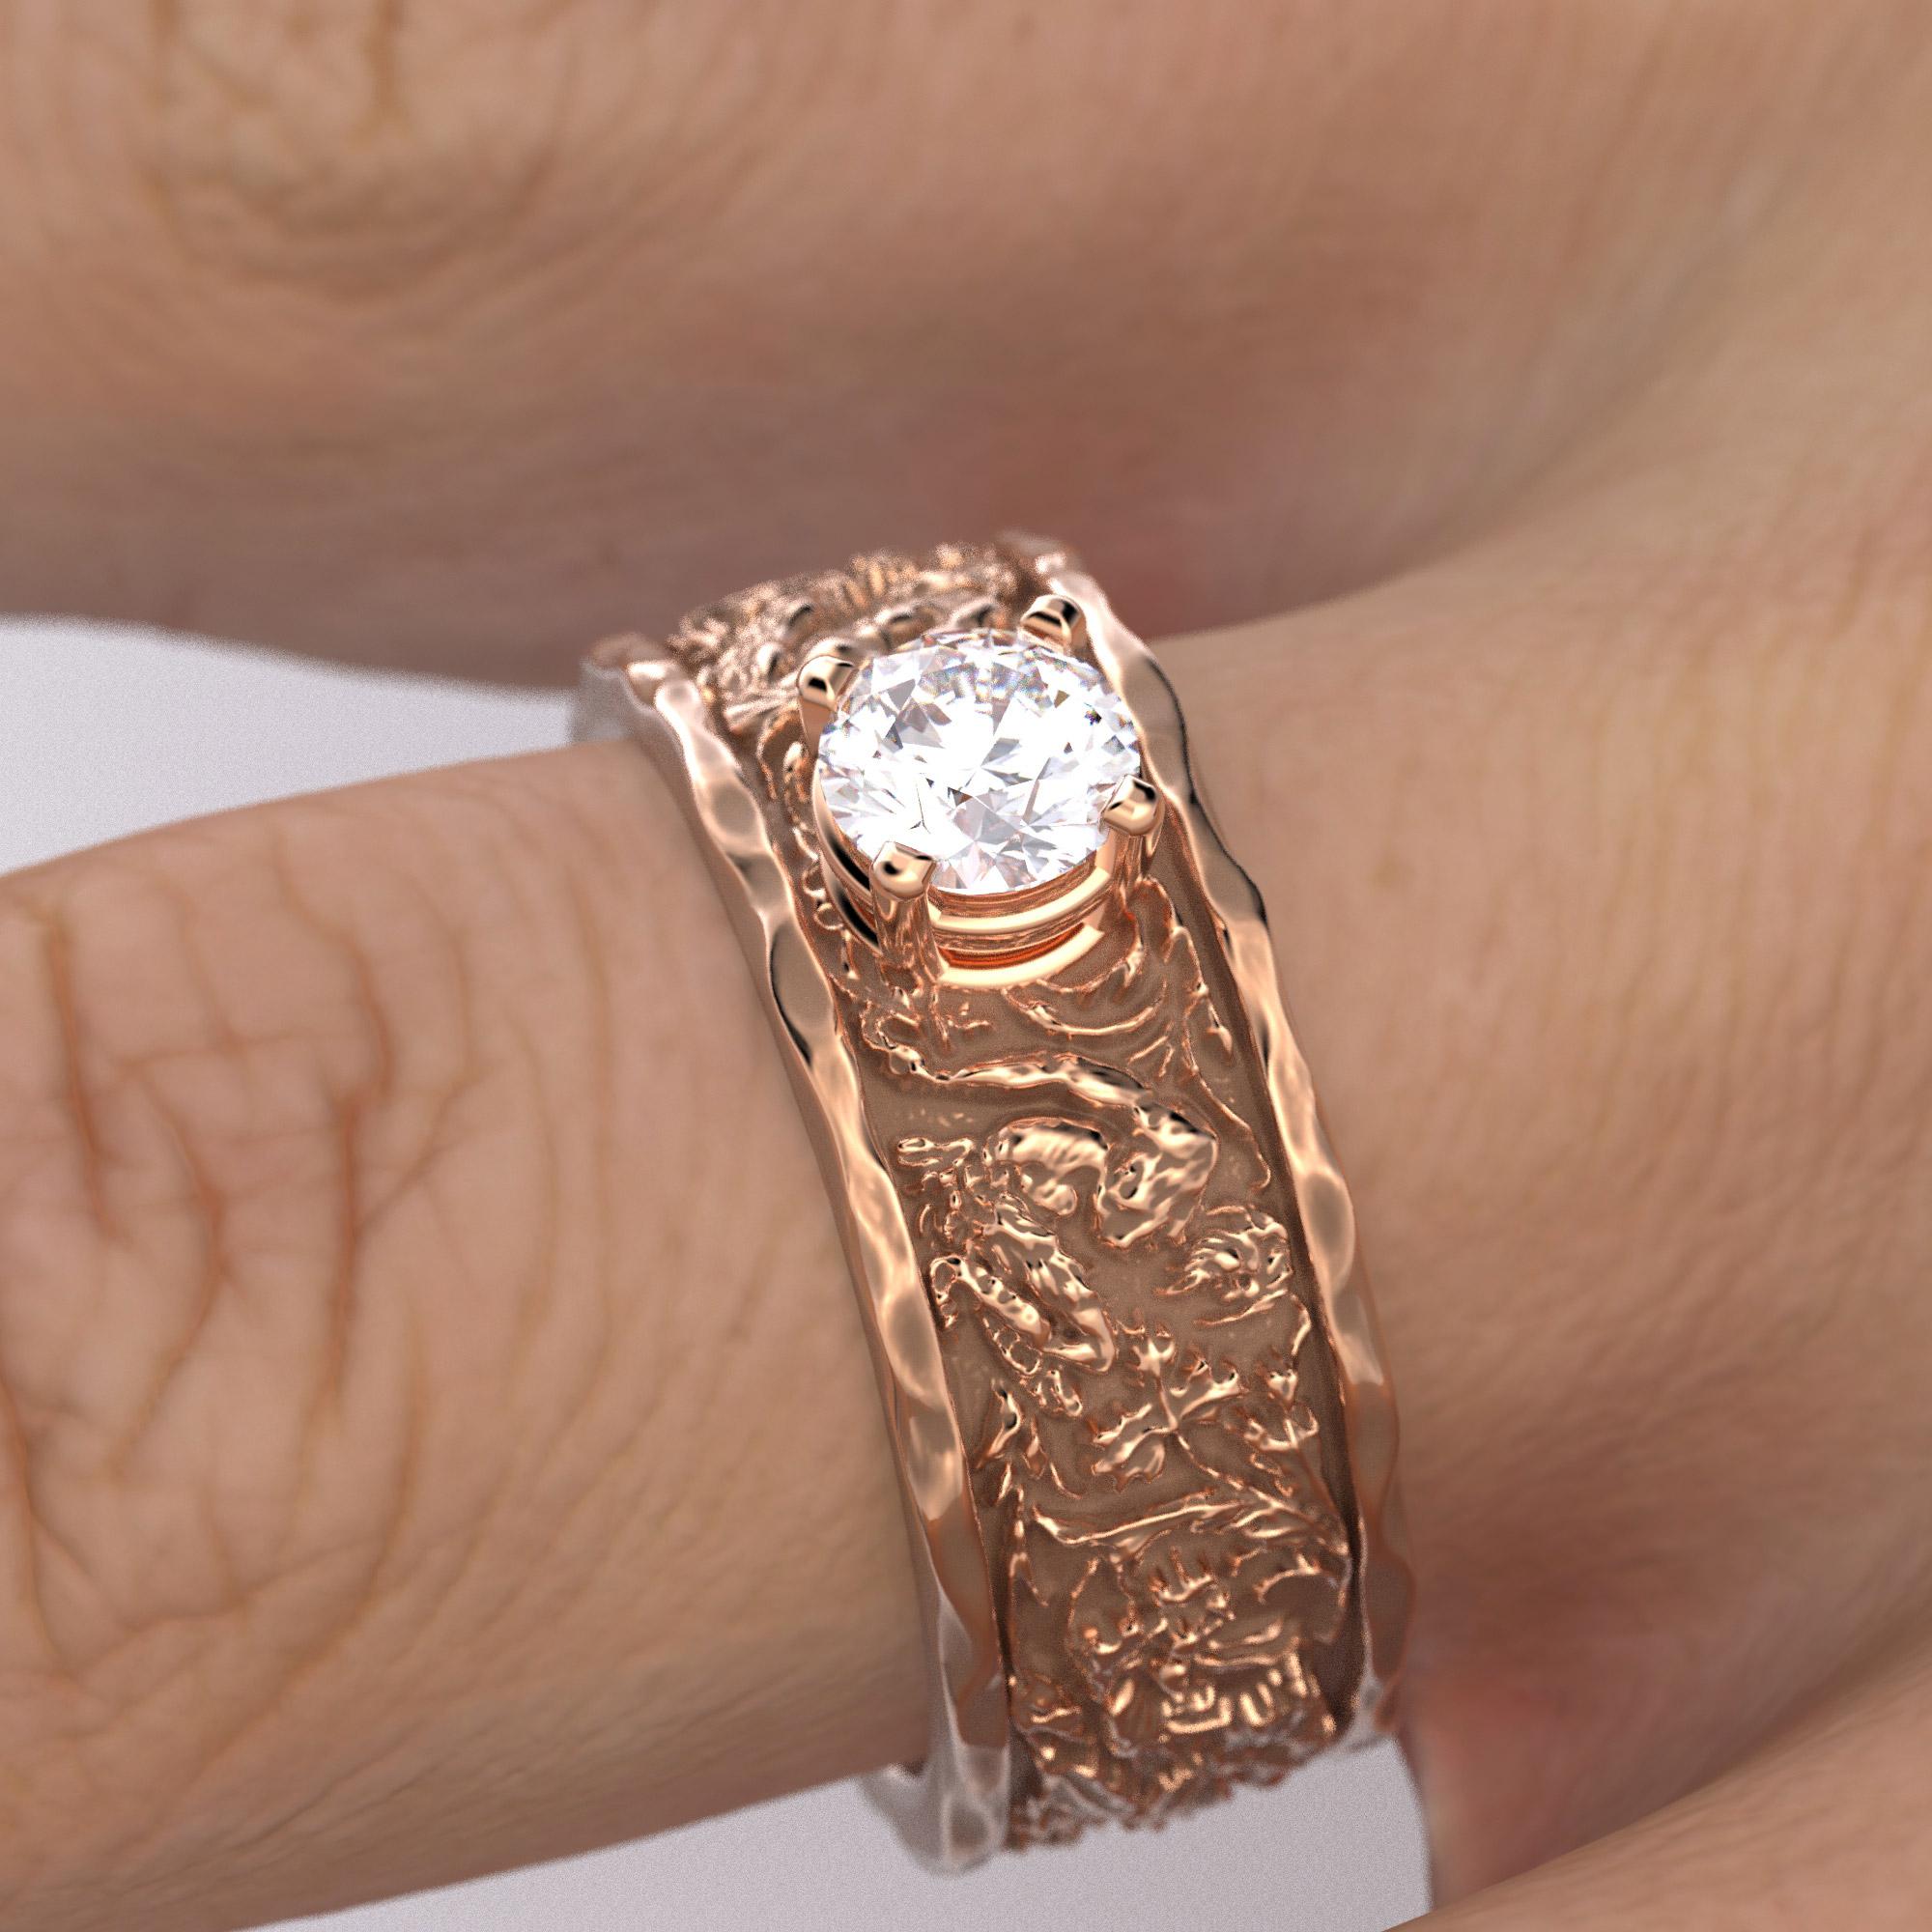 For Sale:  Half Carat Diamond Men's Gold Band in 14k Gold, Designed and Crafted in Italy 10